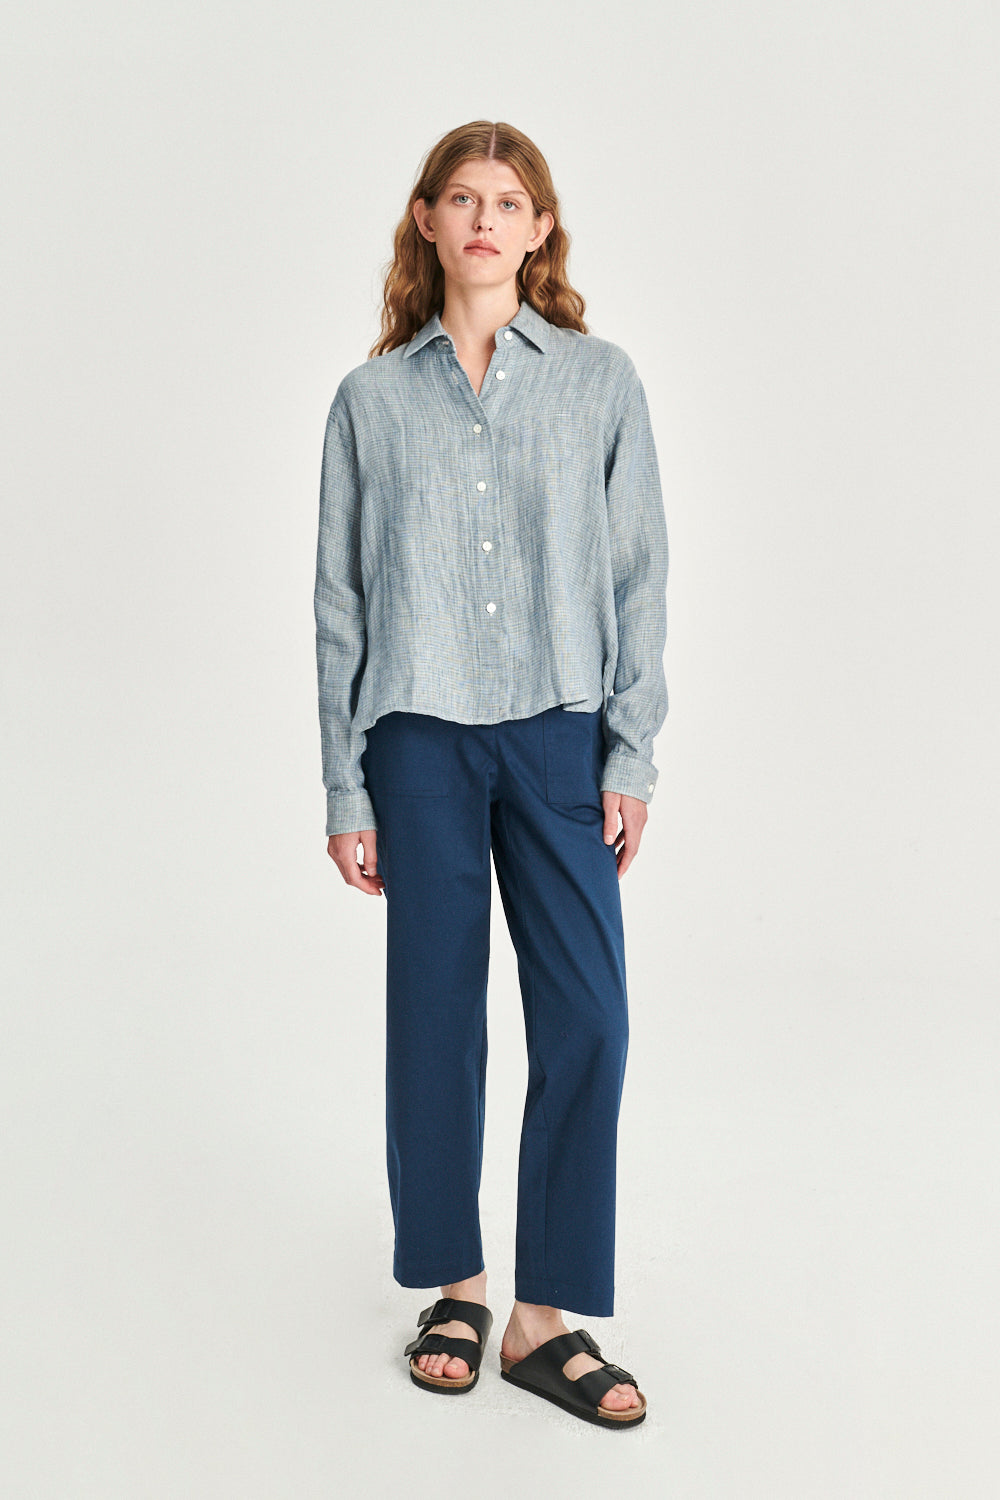 RELAXED SHIRT - Blue and green